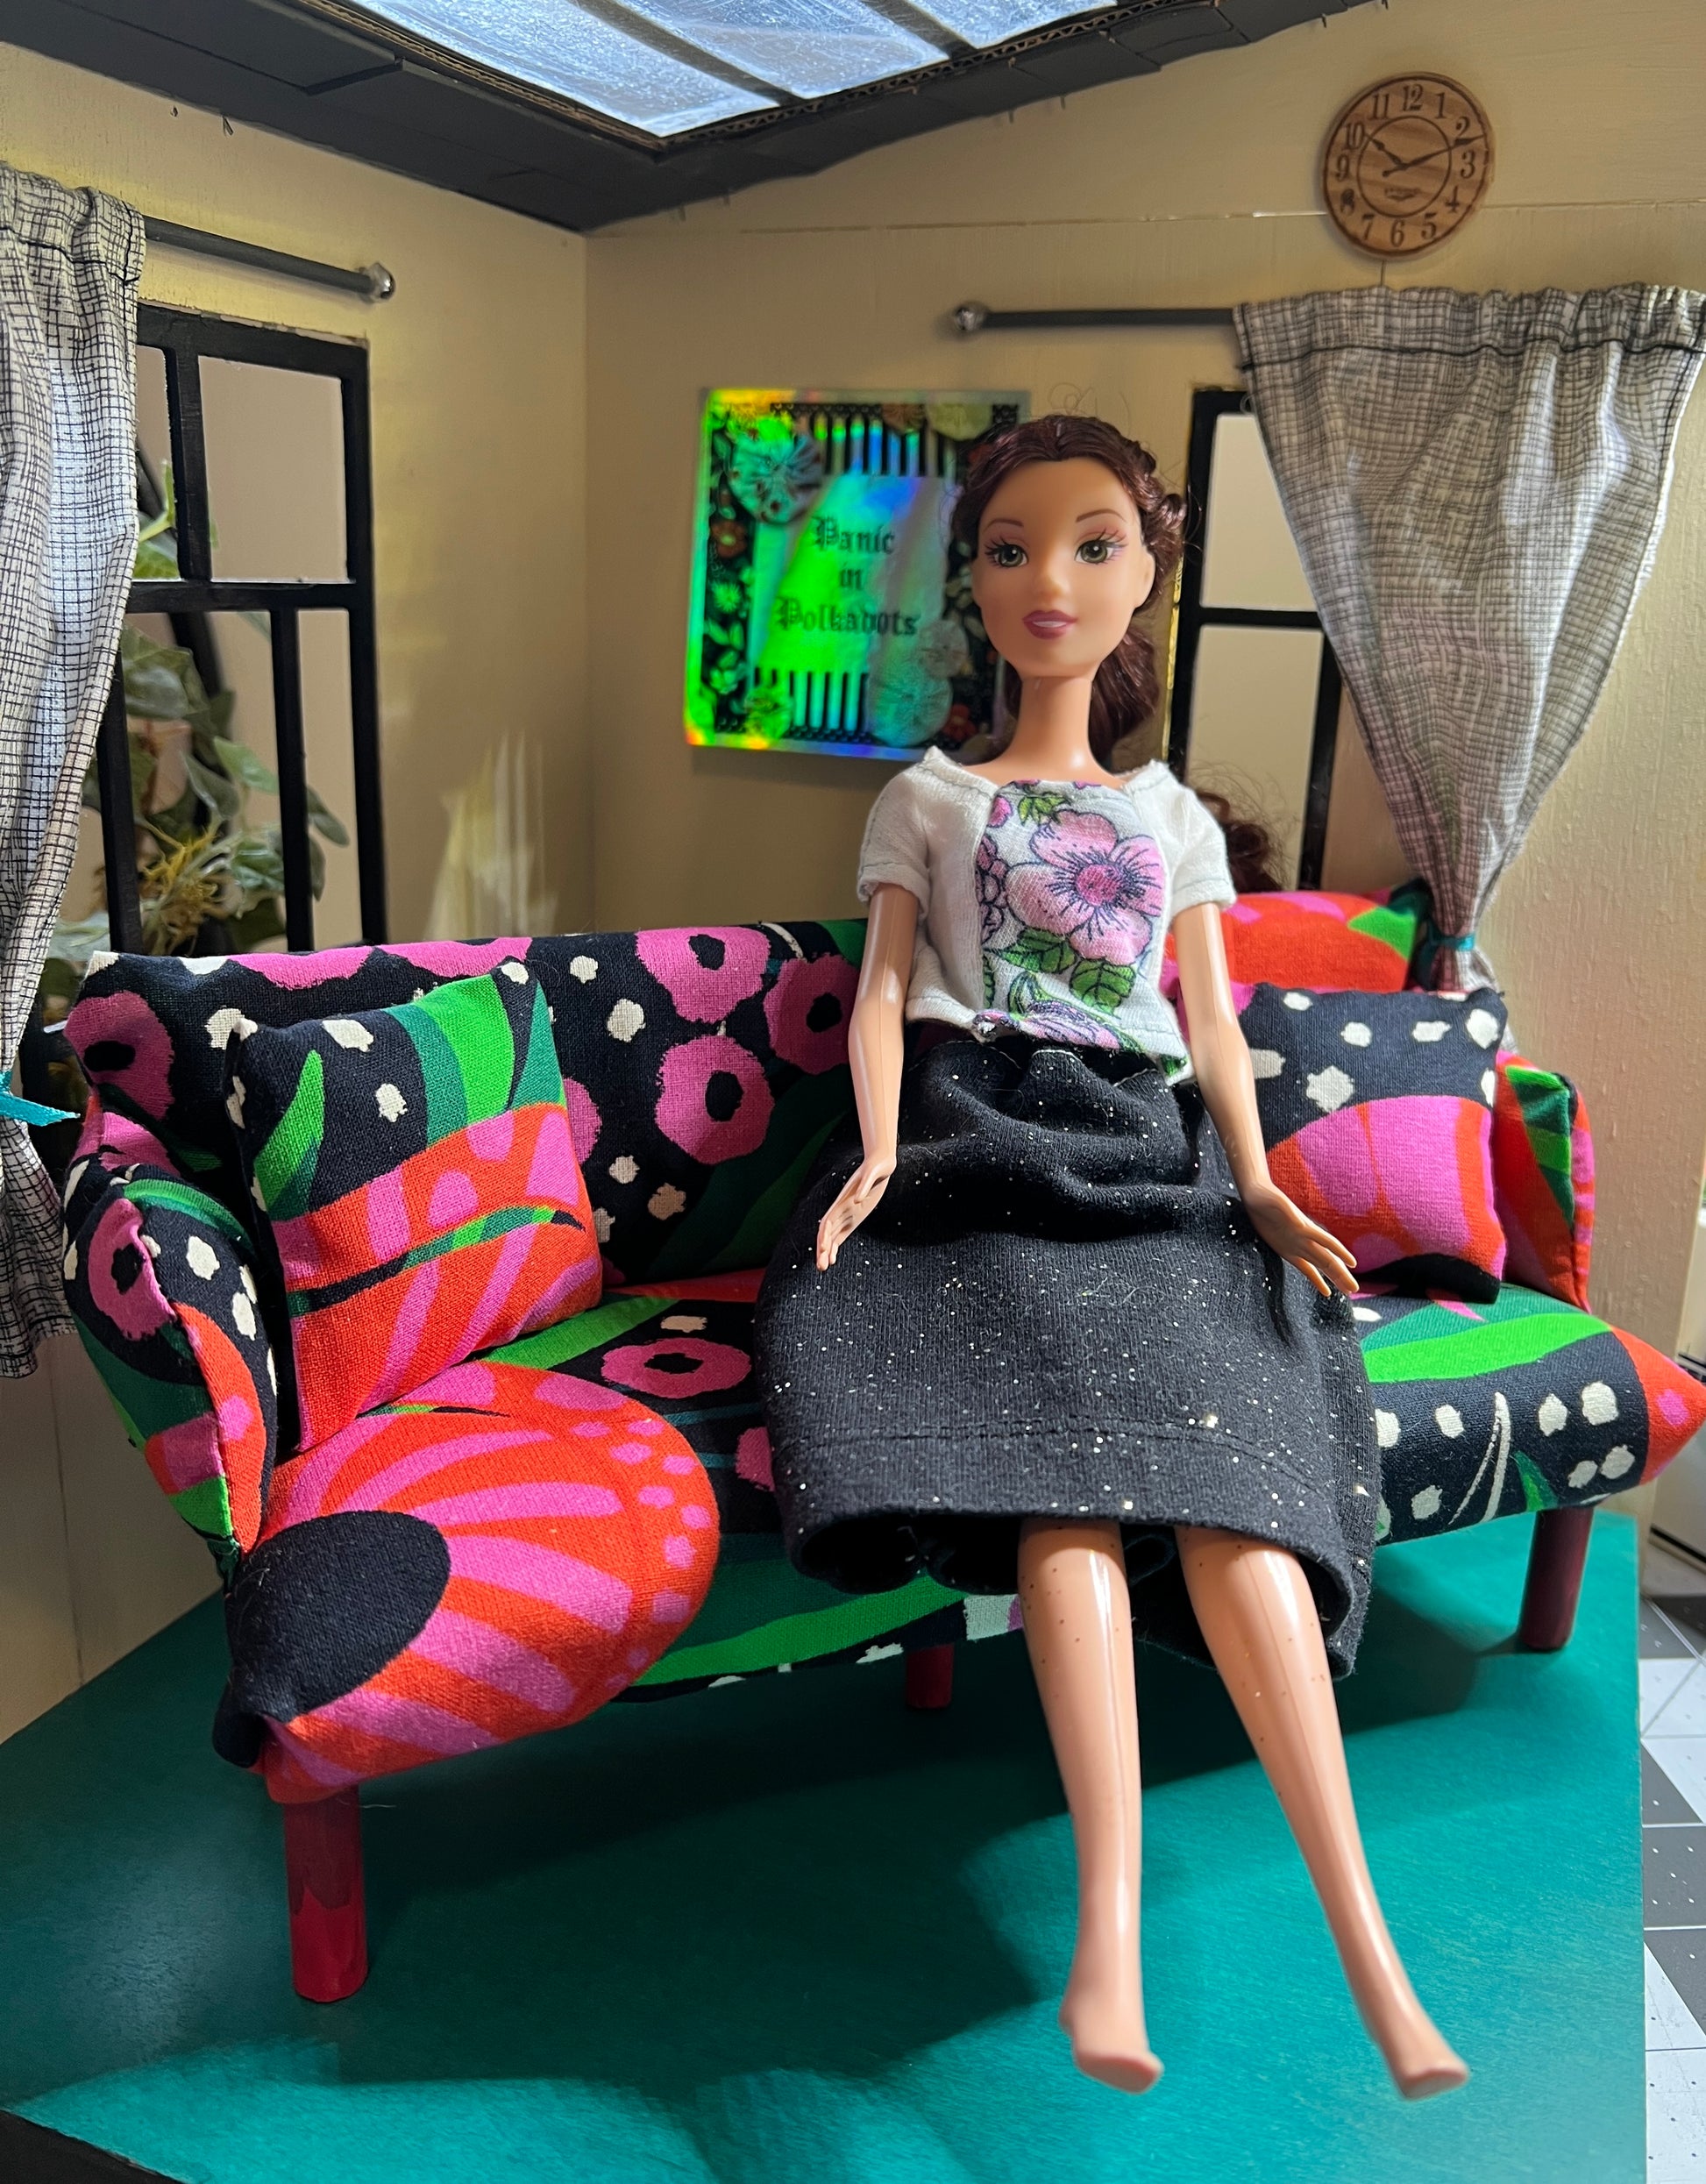 Bold bright handmade couch with Barbie for scale, not included